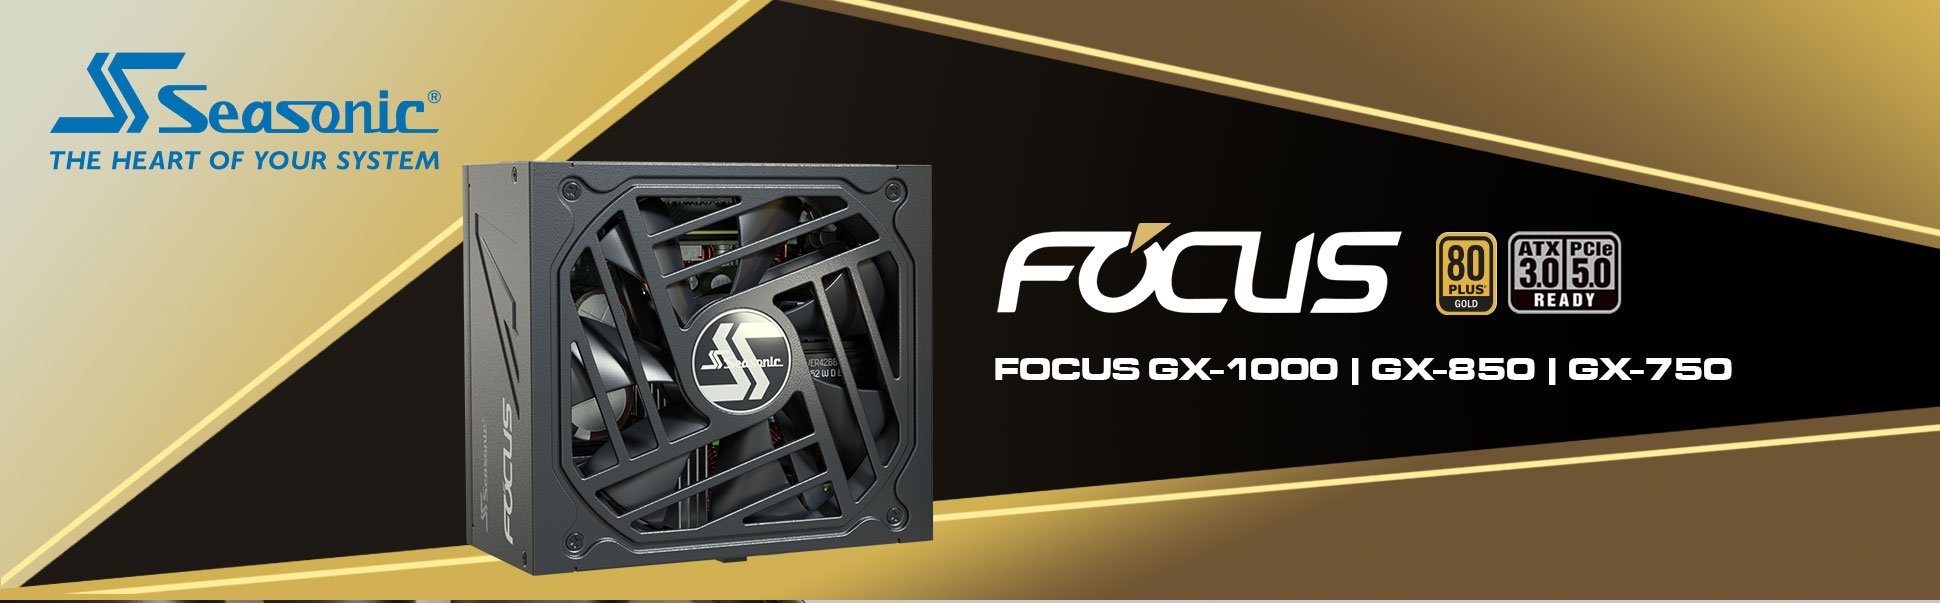 Seasonic FOCUS V3 GX-750, 750W 80+ Gold, Full-Modular, Fan Control in  Fanless, Silent, and Cooling Mode, Perfect Power Supply for Gaming and Various  Application, SSR-750FX3. 